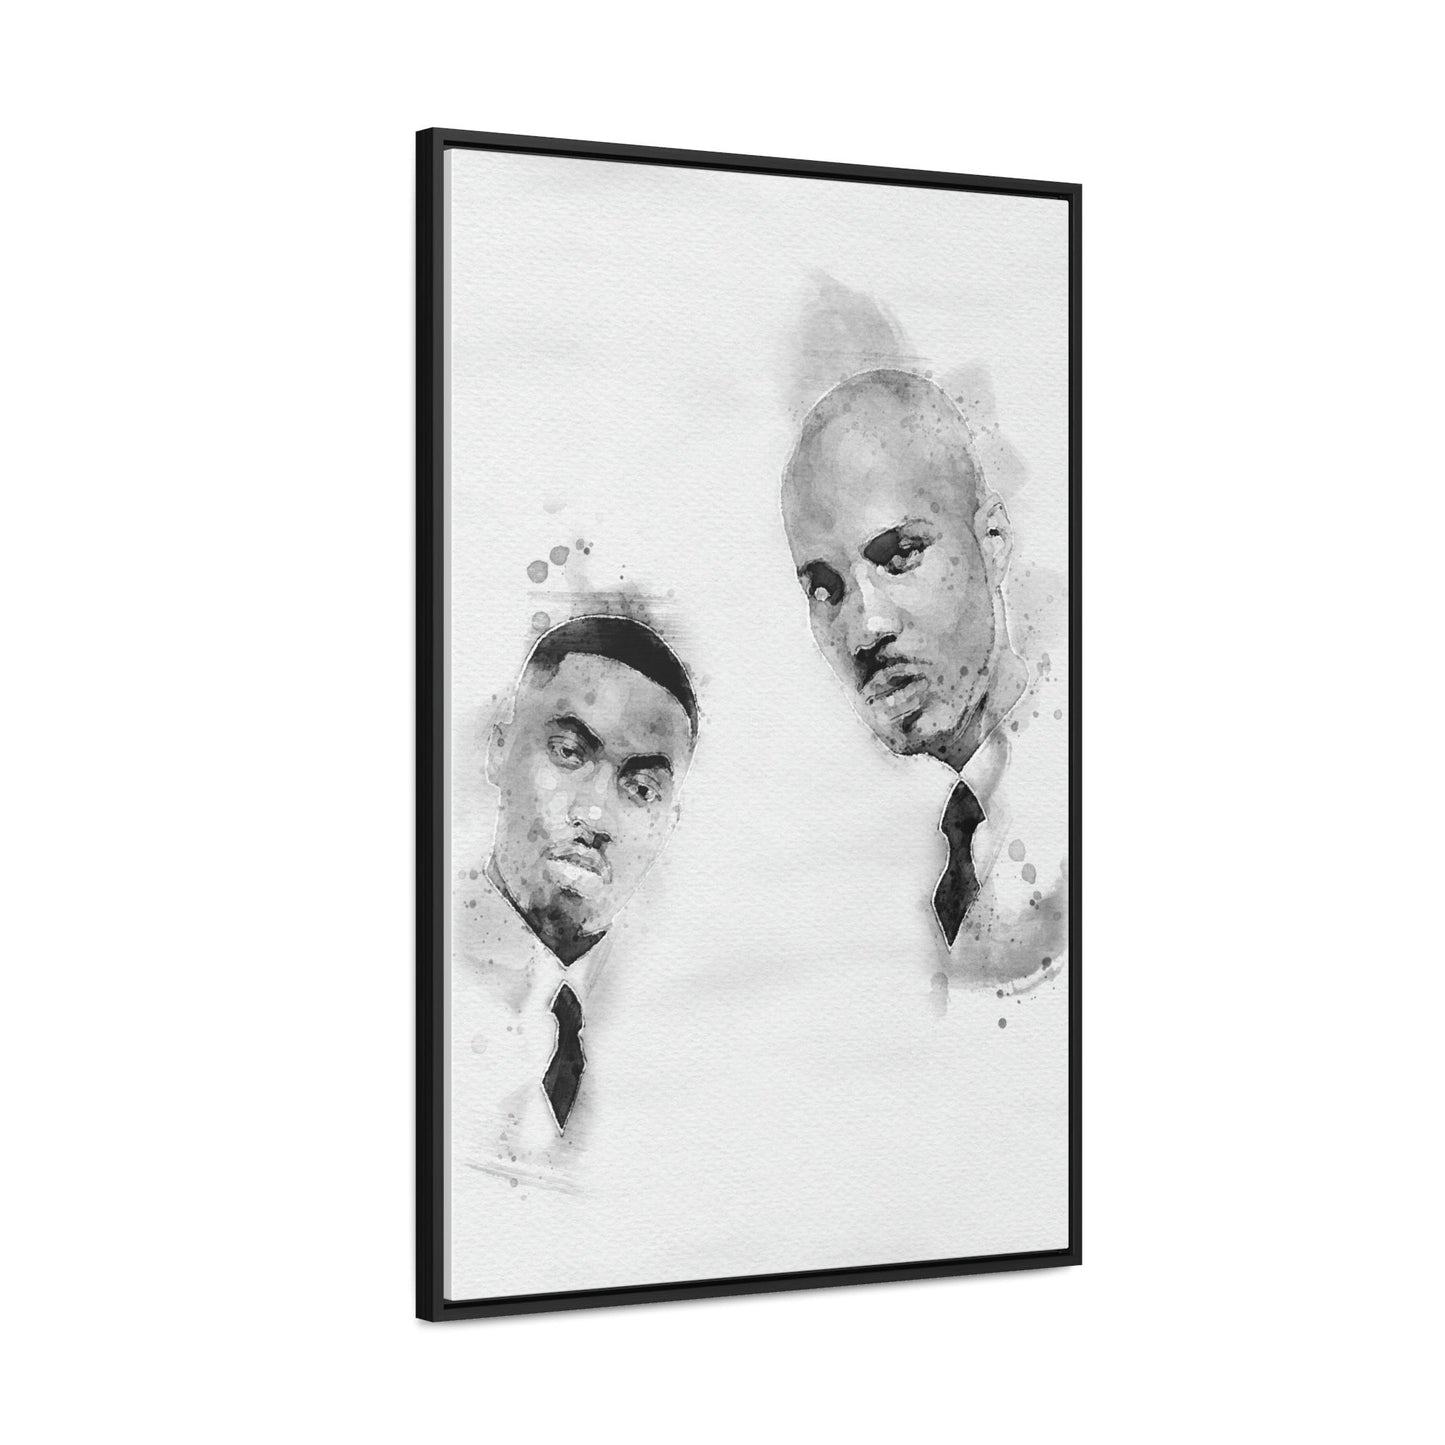 Belly Movie Poster, DMX and Nas poster, Hood Movies, DMX Poster, Nas Poster, Wall Art